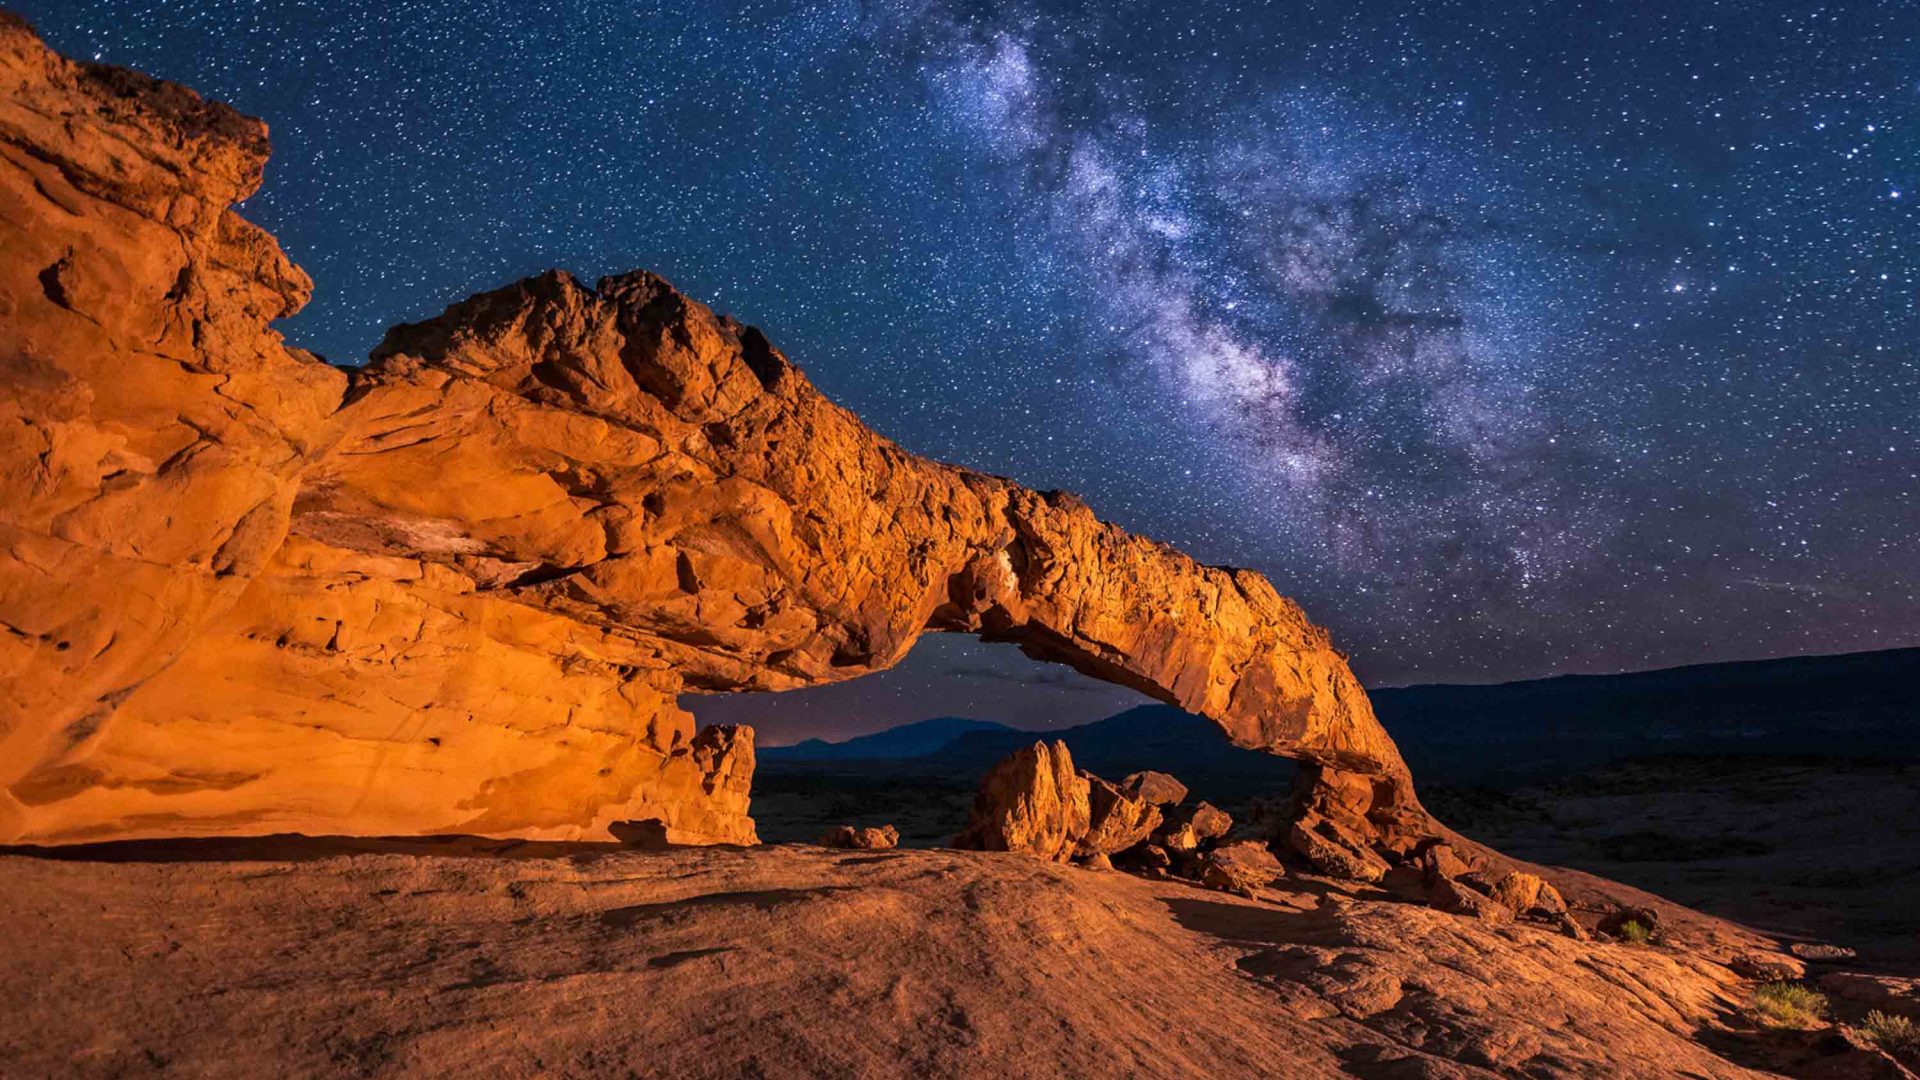 The natural arch of a rock is illuminated by the night sky.